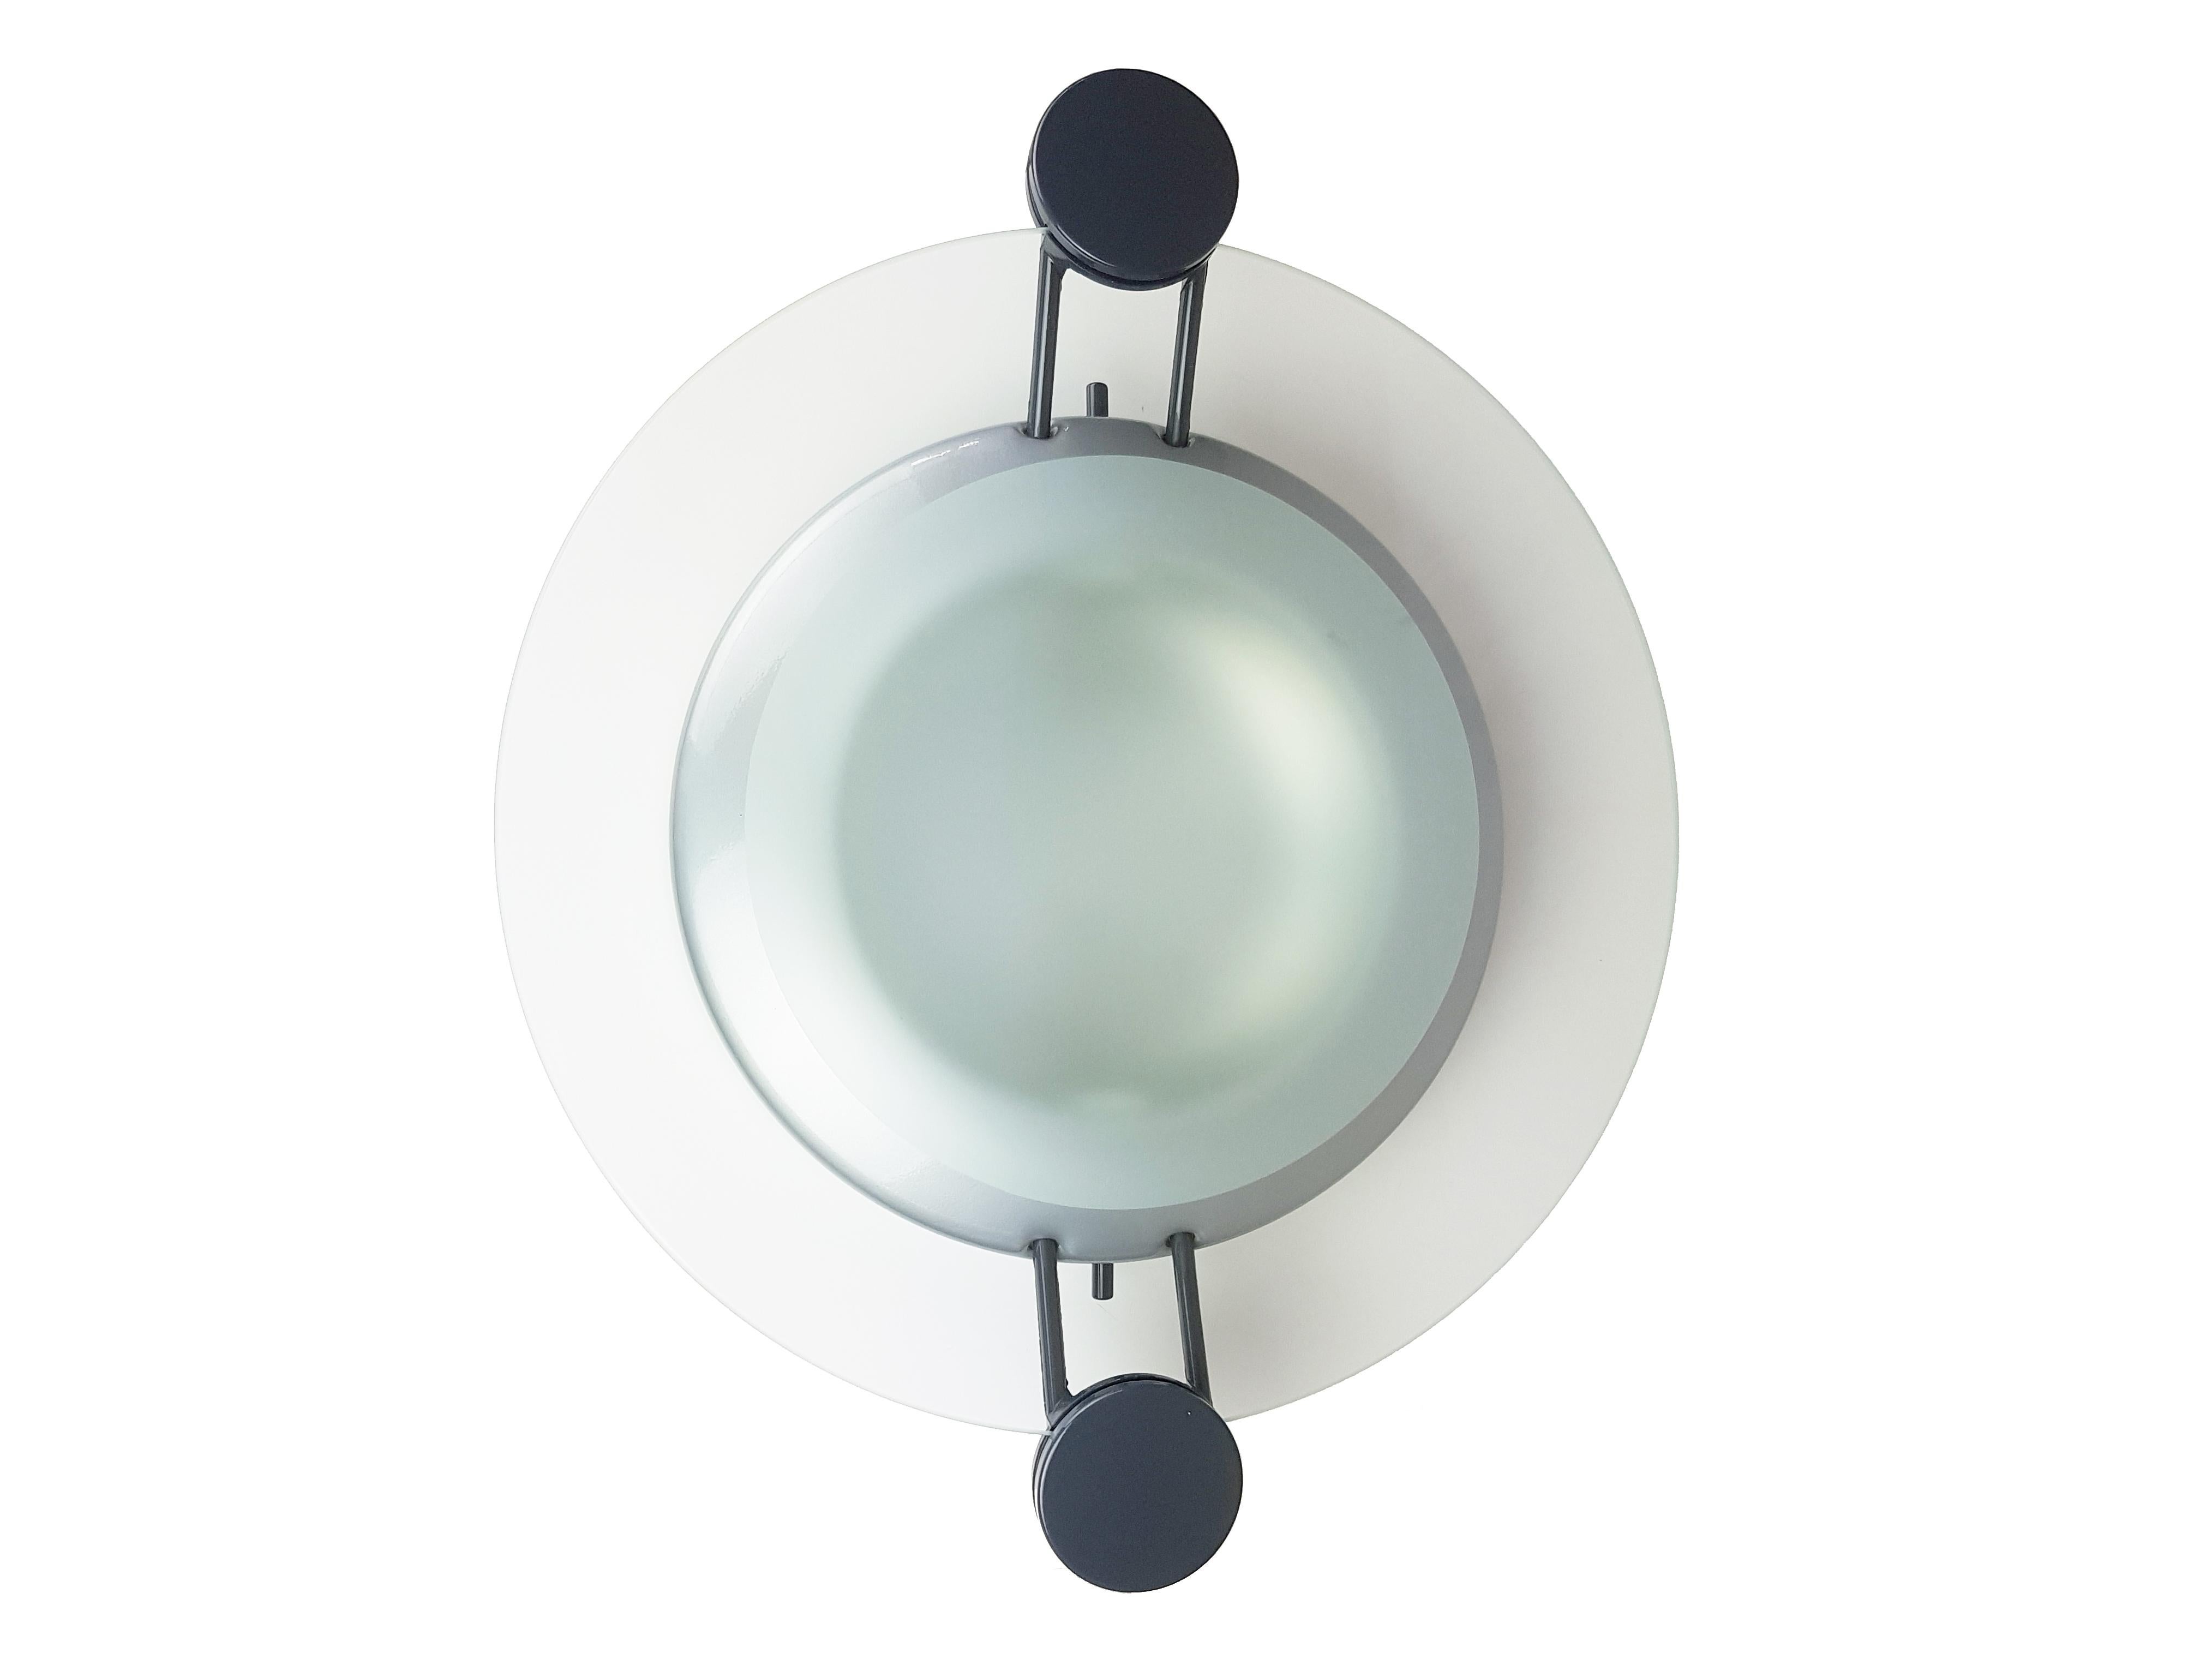 This Postmodern wall or ceiling lamp is made from a grey plastic and silver metal structure with a round sandblasted glass shade. It features 1 lamp E27 socket and remains in very good condition.